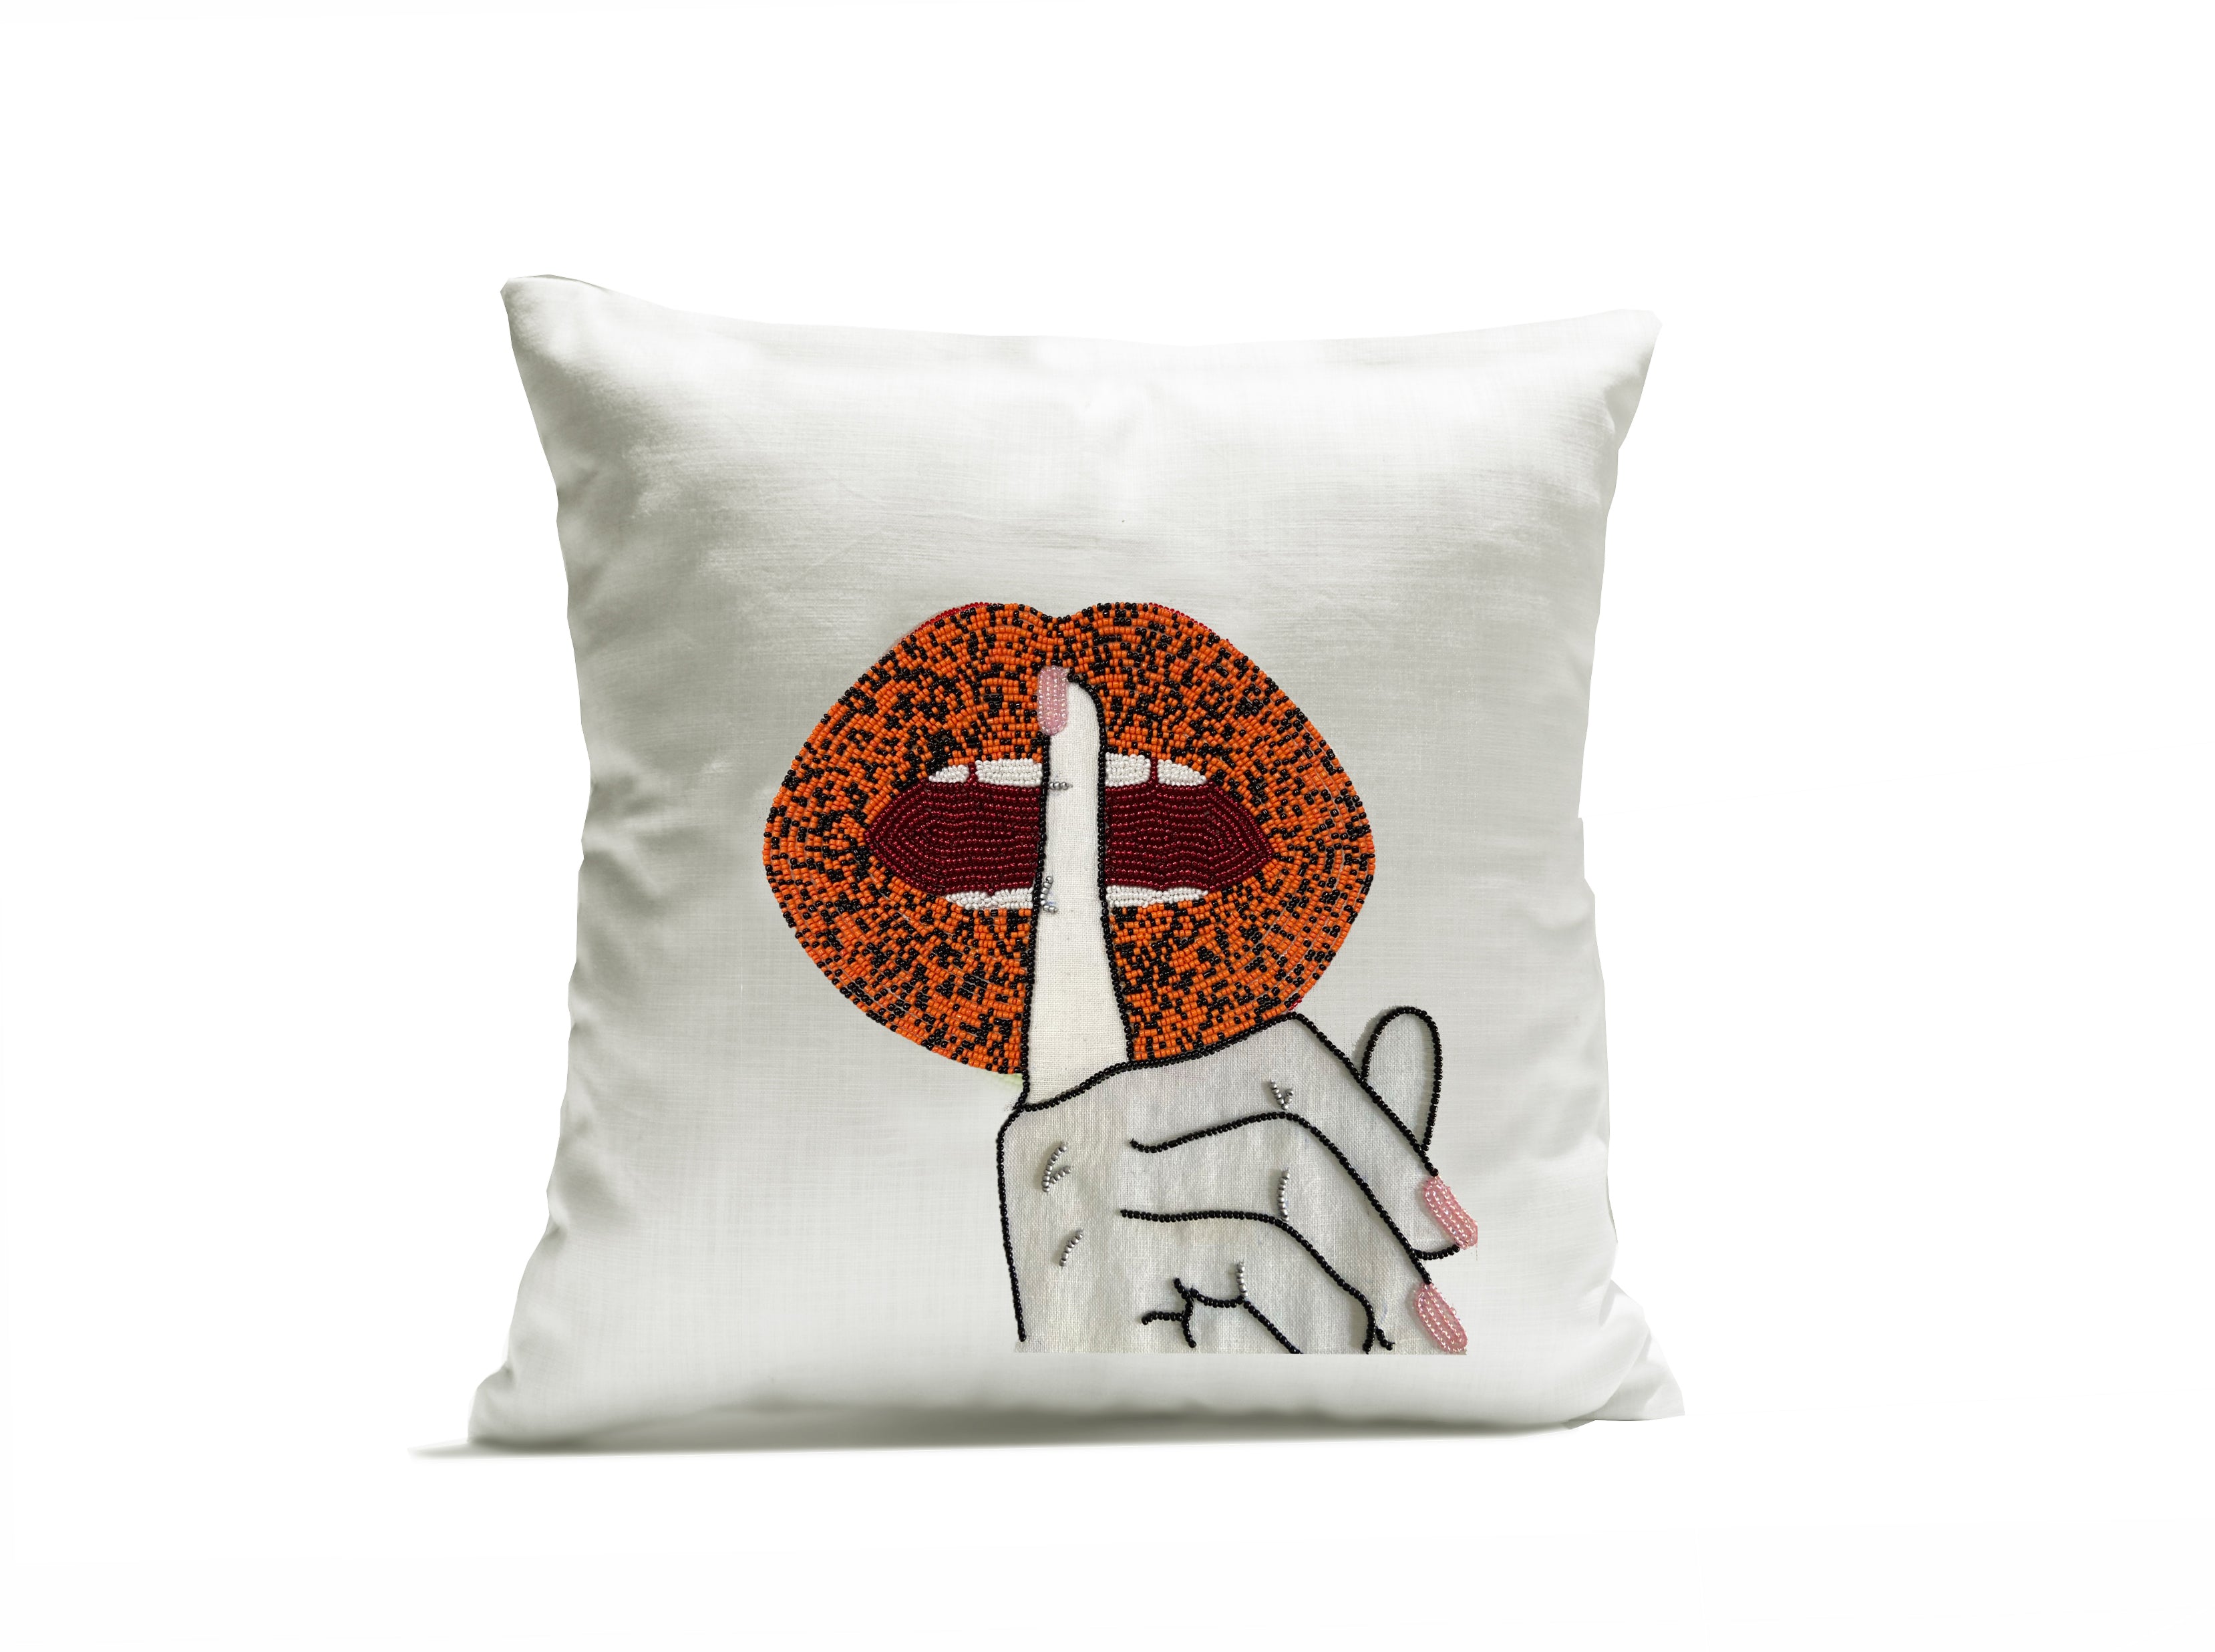 Amore Beaute pillow cover brings together Mod style and Pop Art right to your home décor. 